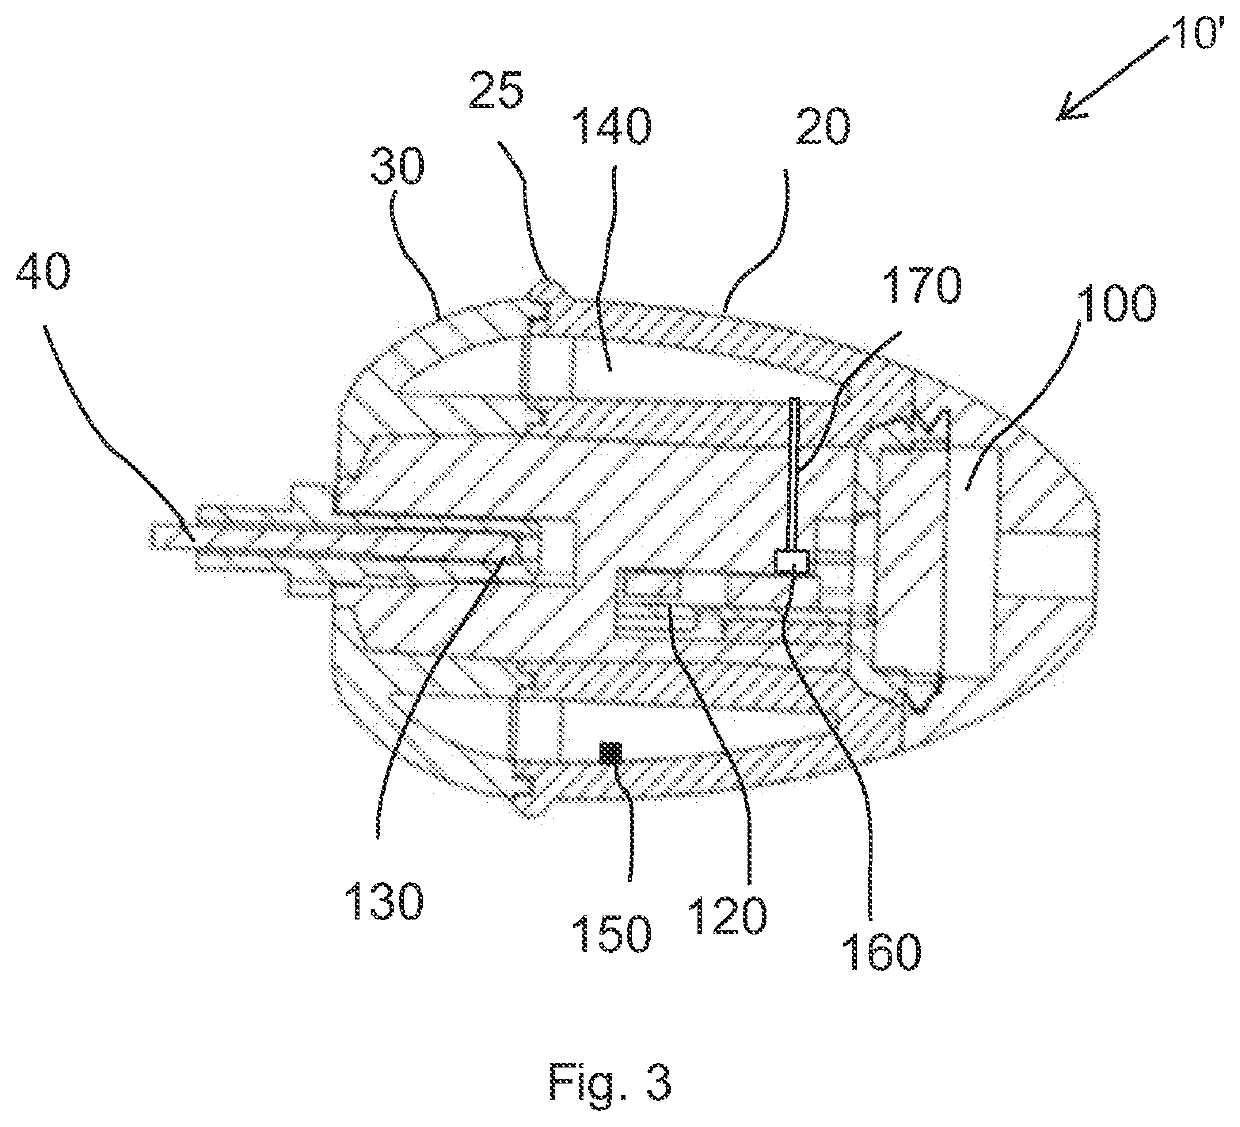 Hyperdexterous surgical system user interface devices